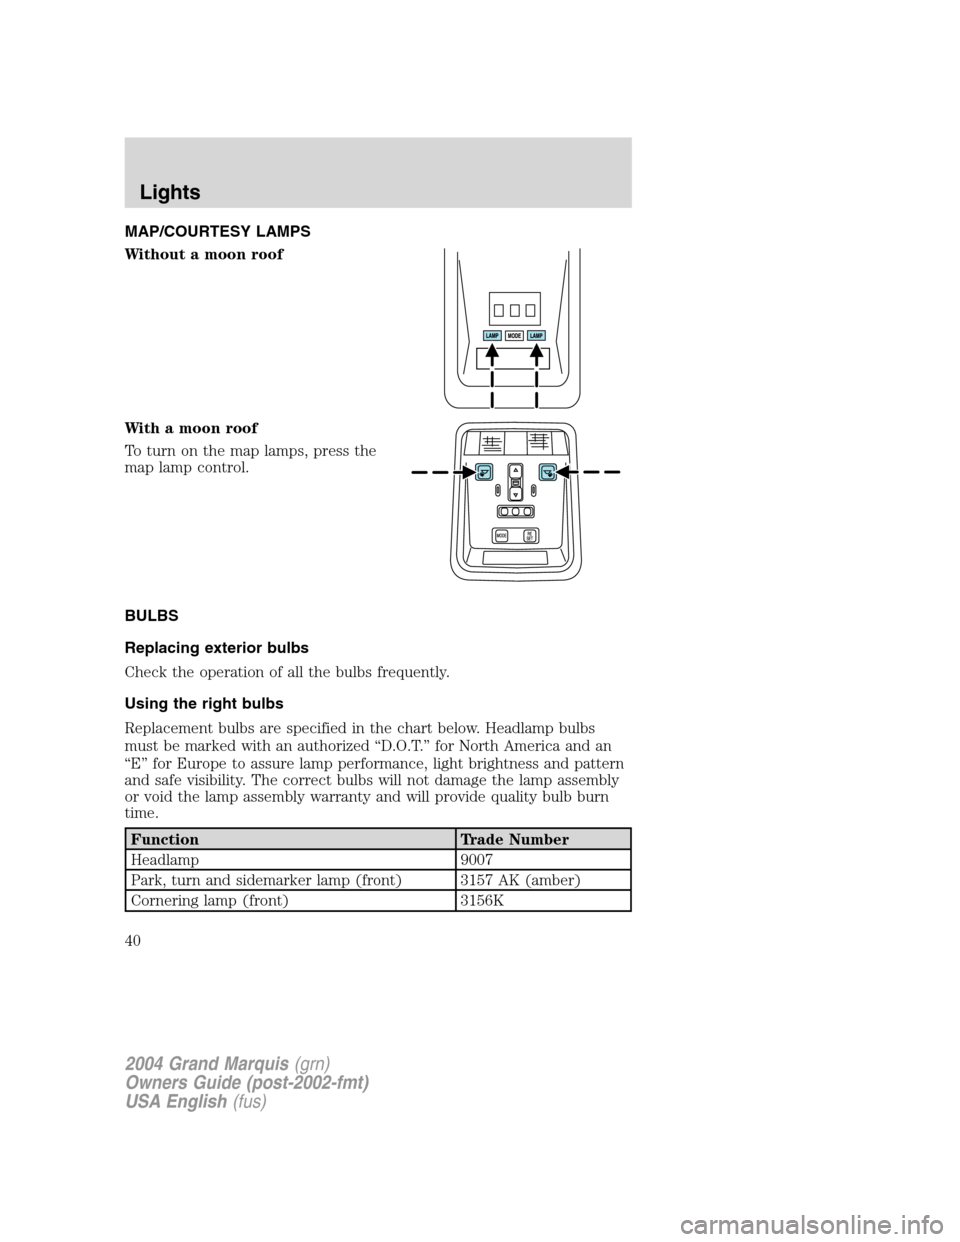 Mercury Grand Marquis 2004  s Owners Guide MAP/COURTESY LAMPS
Without a moon roof
With a moon roof
To turn on the map lamps, press the
map lamp control.
BULBS
Replacing exterior bulbs
Check the operation of all the bulbs frequently.
Using the 